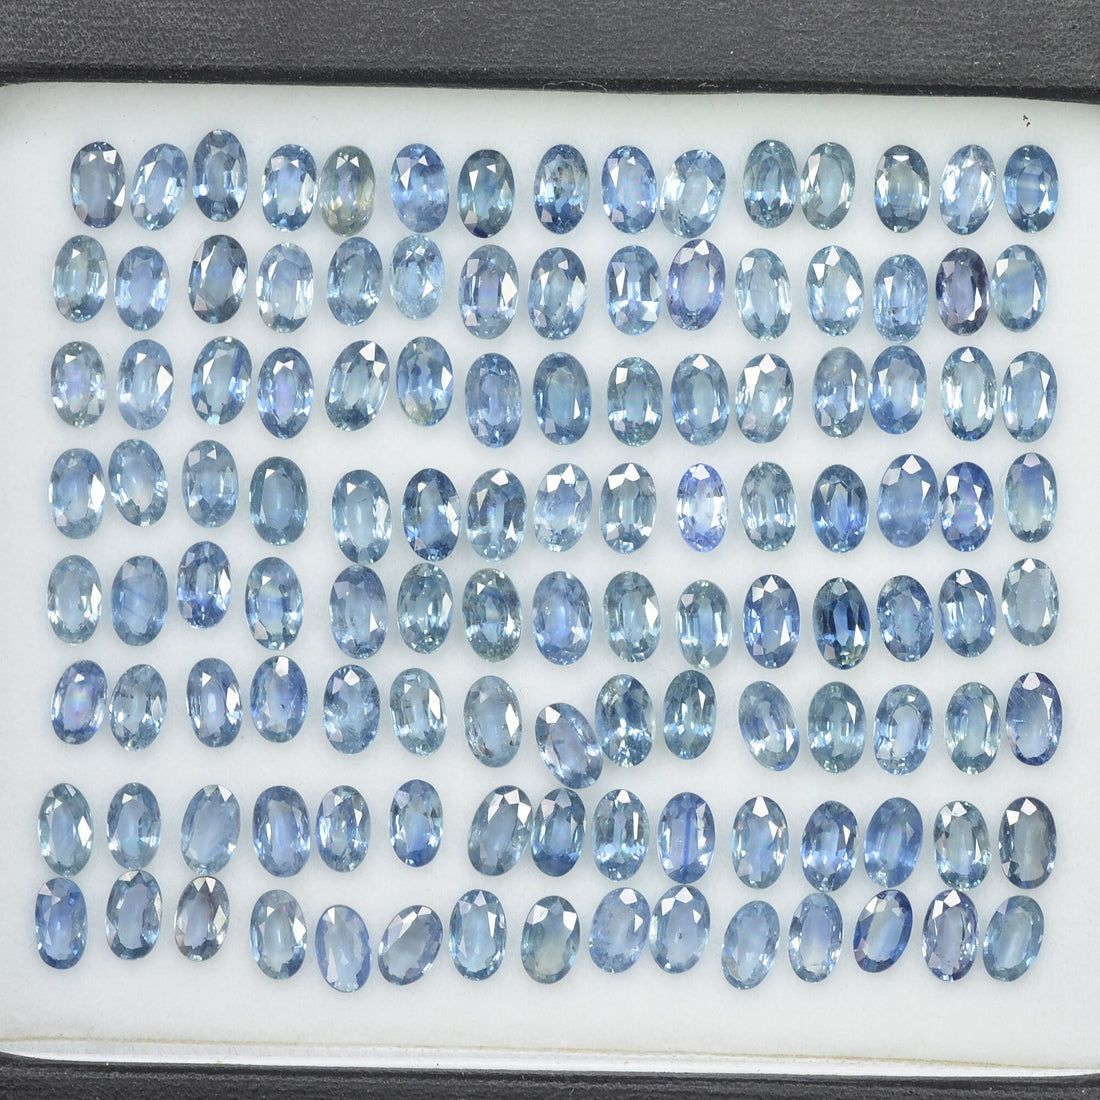 5x3 mm Natural Calibrated Blue Sapphire Loose Gemstone Oval Cut